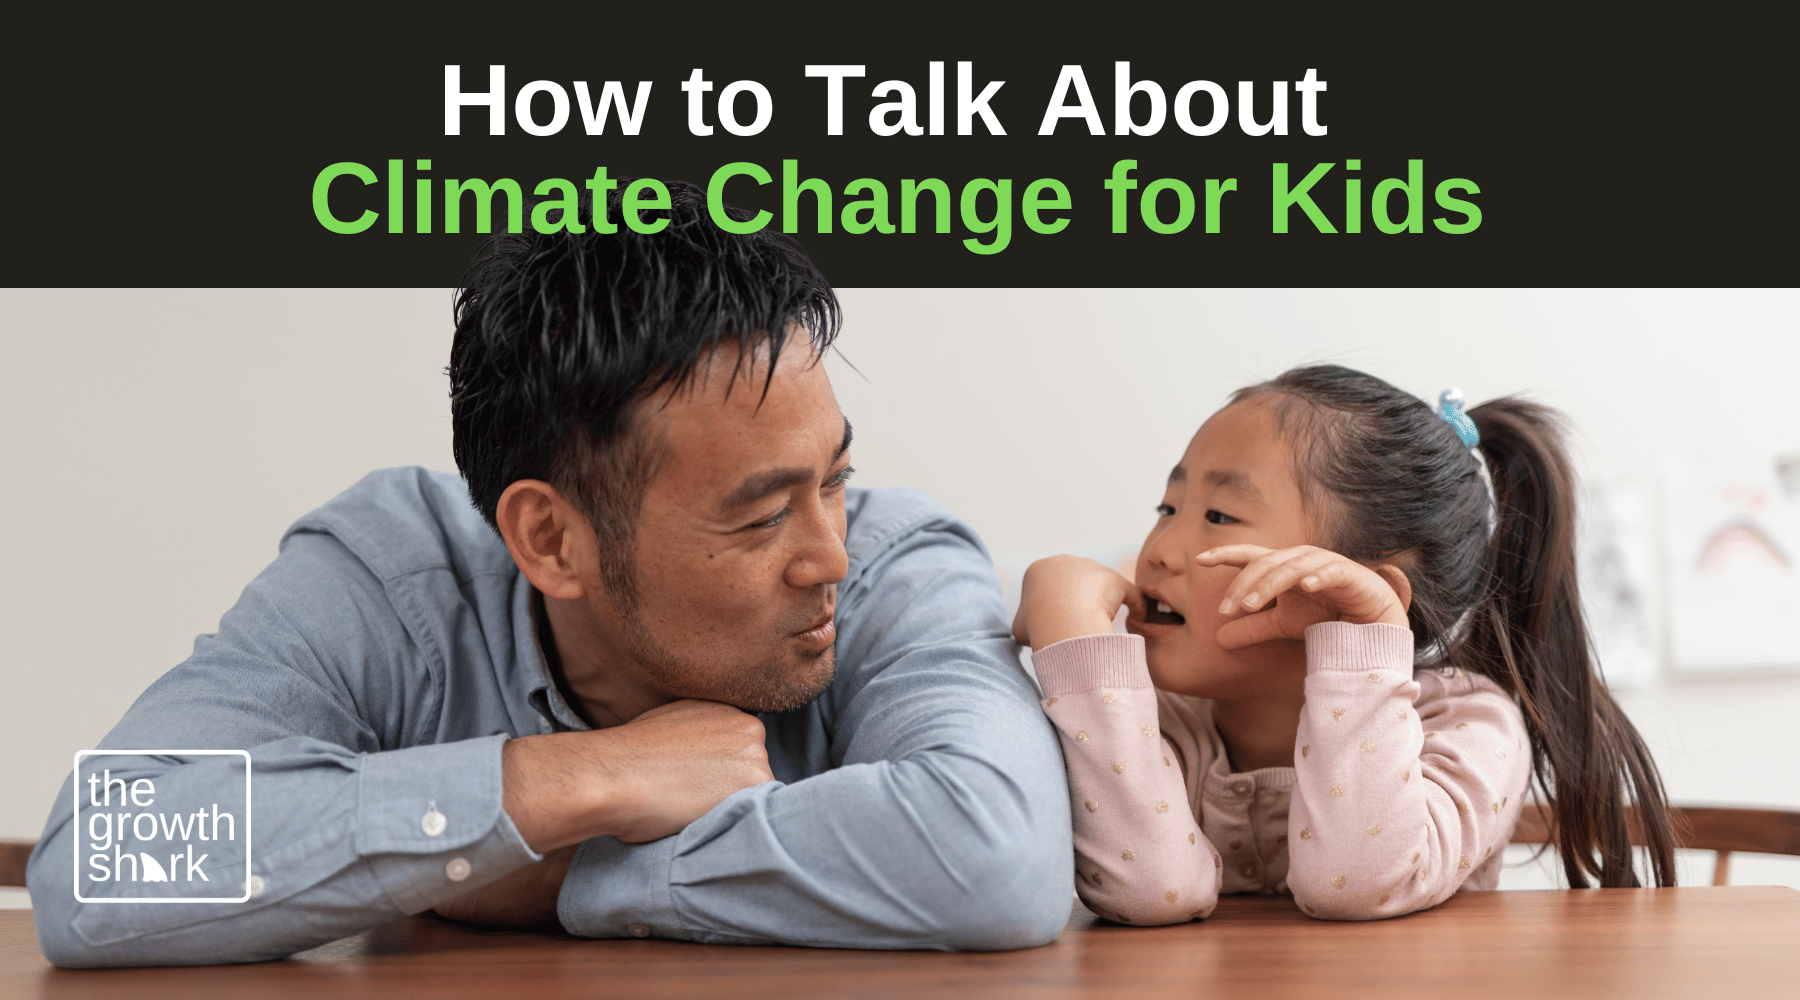 How to Talk About Climate Change for Kids